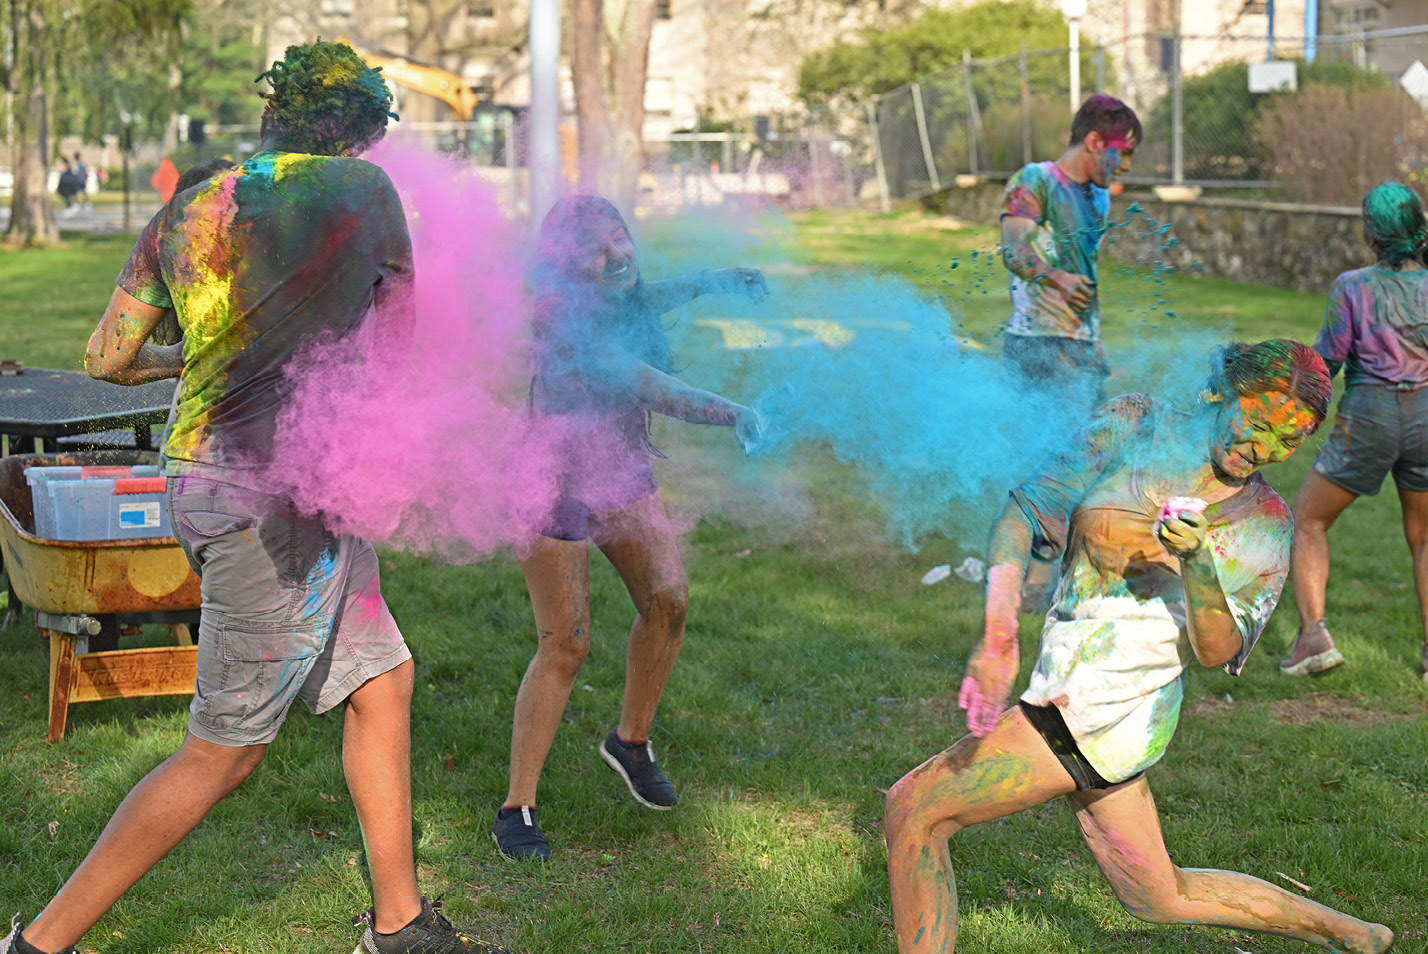 Students playing at a celebration of Holi, the Hindu festival of colors Friday, April 14, 2023.